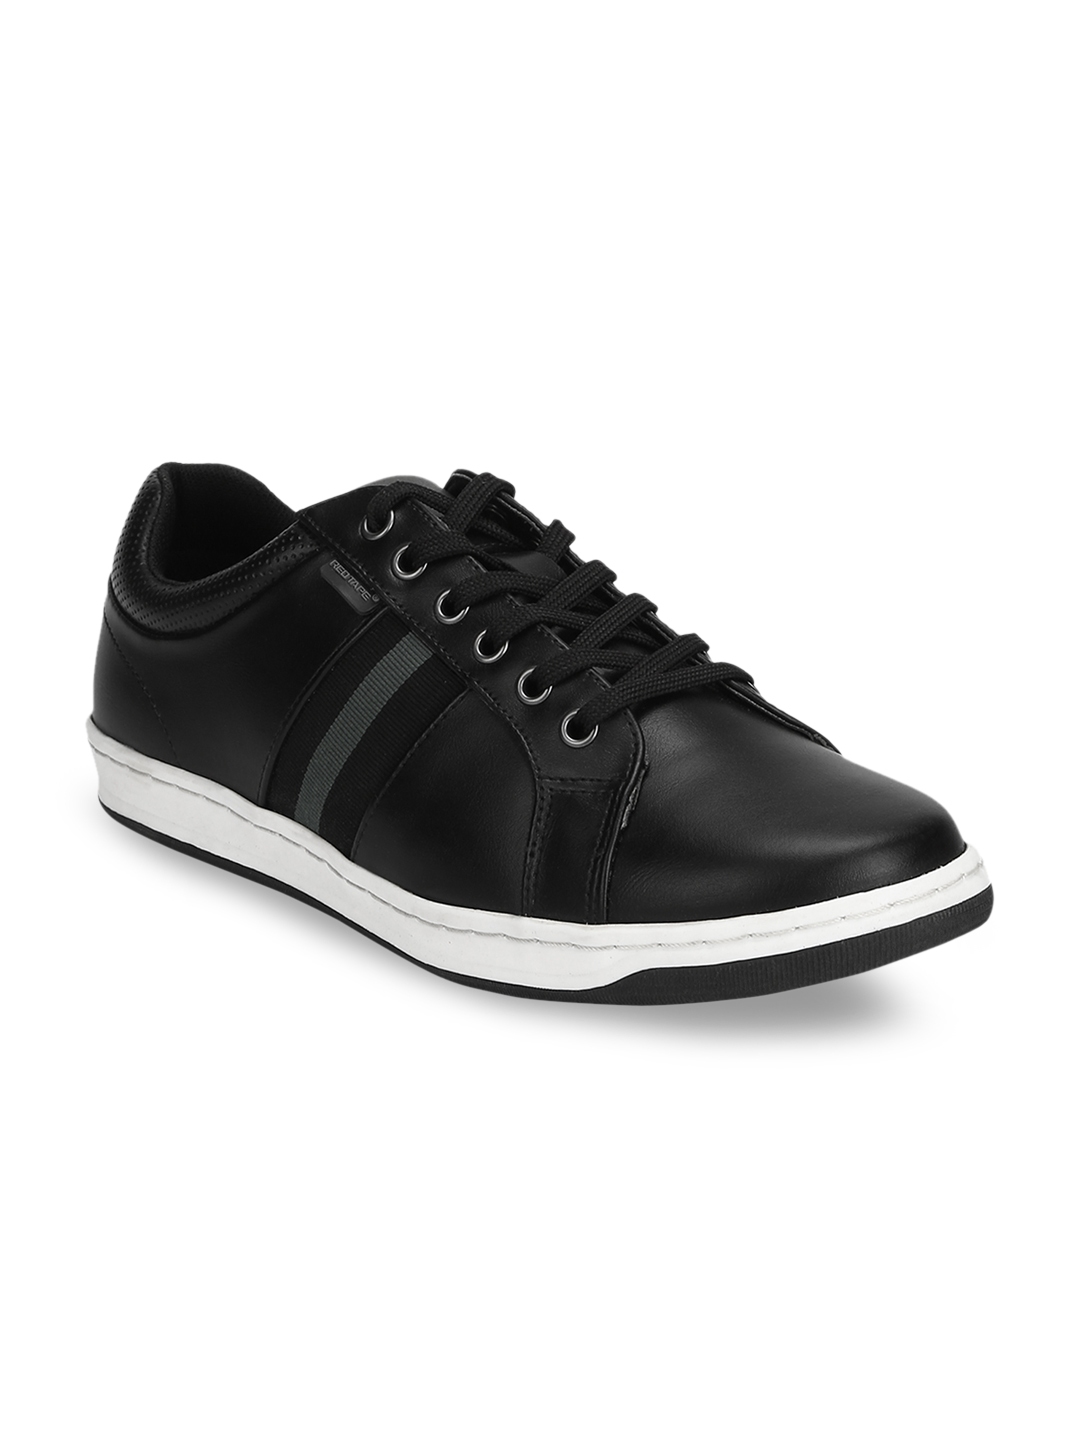 Buy Red Tape Men Black Sneakers - Casual Shoes for Men 9796247 | Myntra